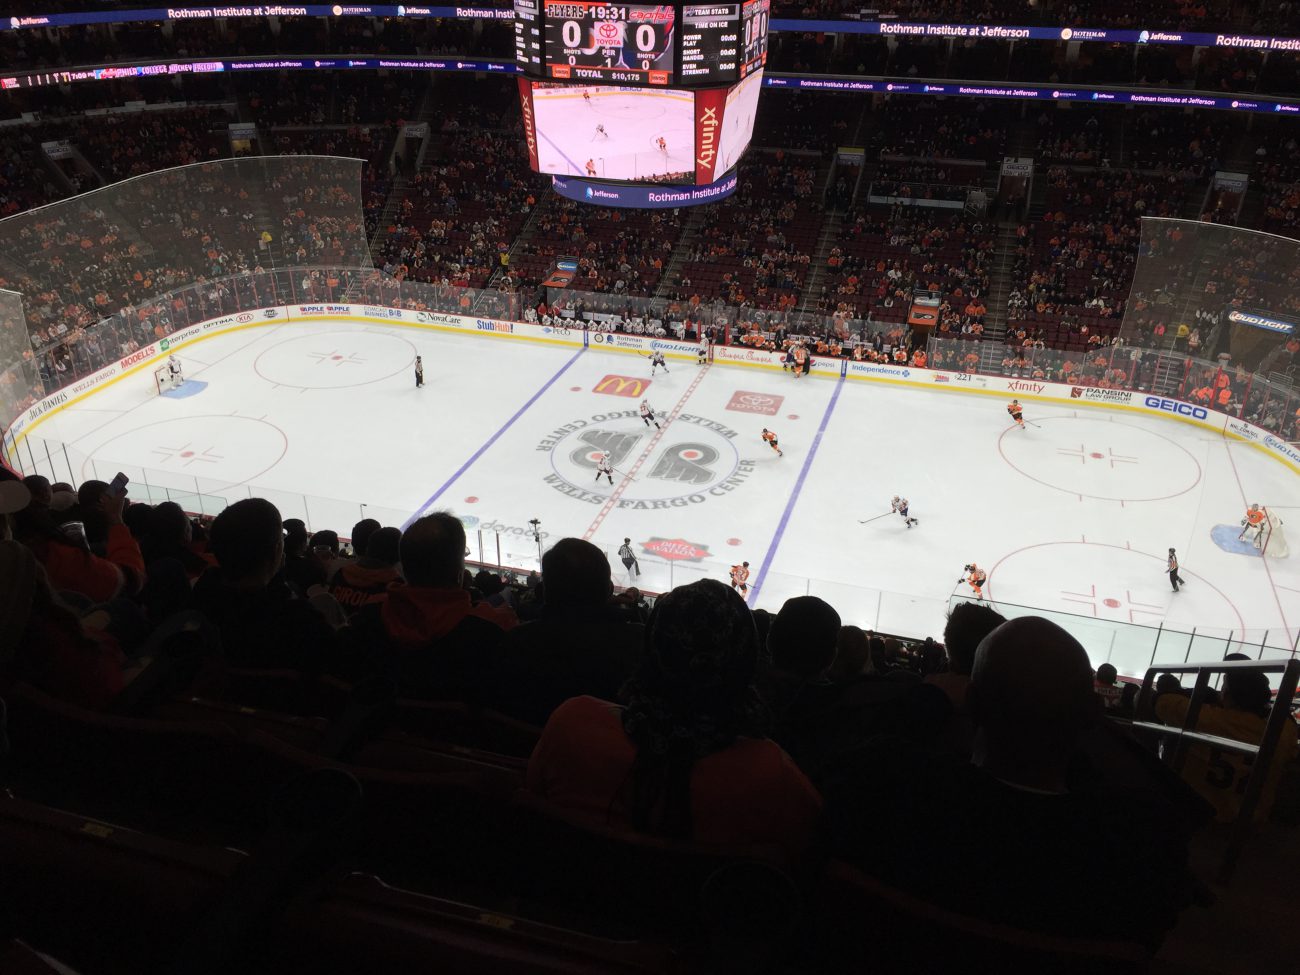 Wells Fargo Center to Introduce the World's First Kinetic 4K